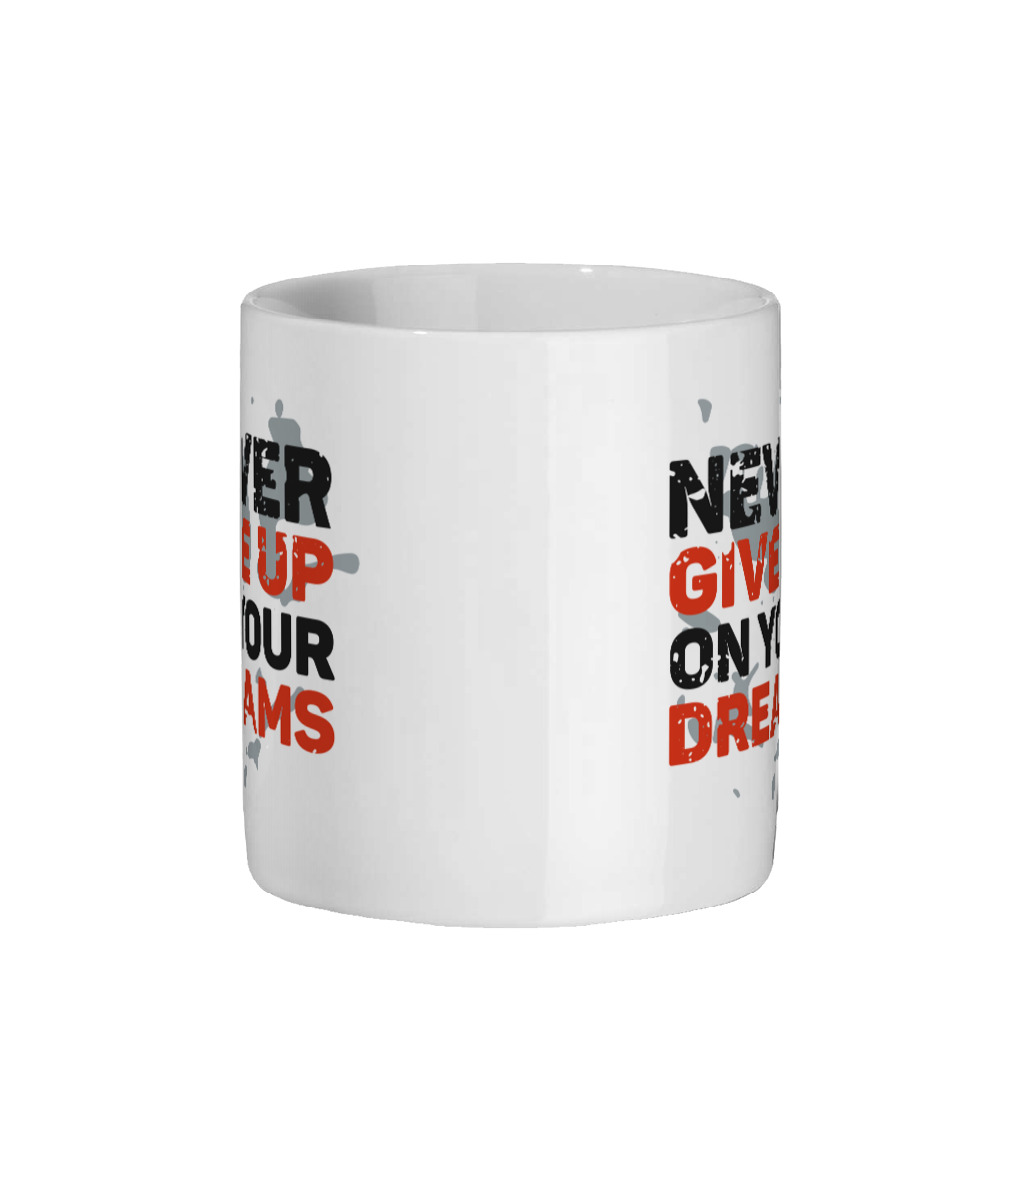 Never Give Up on Your Dreams 11 oz mug. Daily Affirmations, Motivation, Inspiration, Productivity, Mindfulness, Empowering. Perfect Gift.